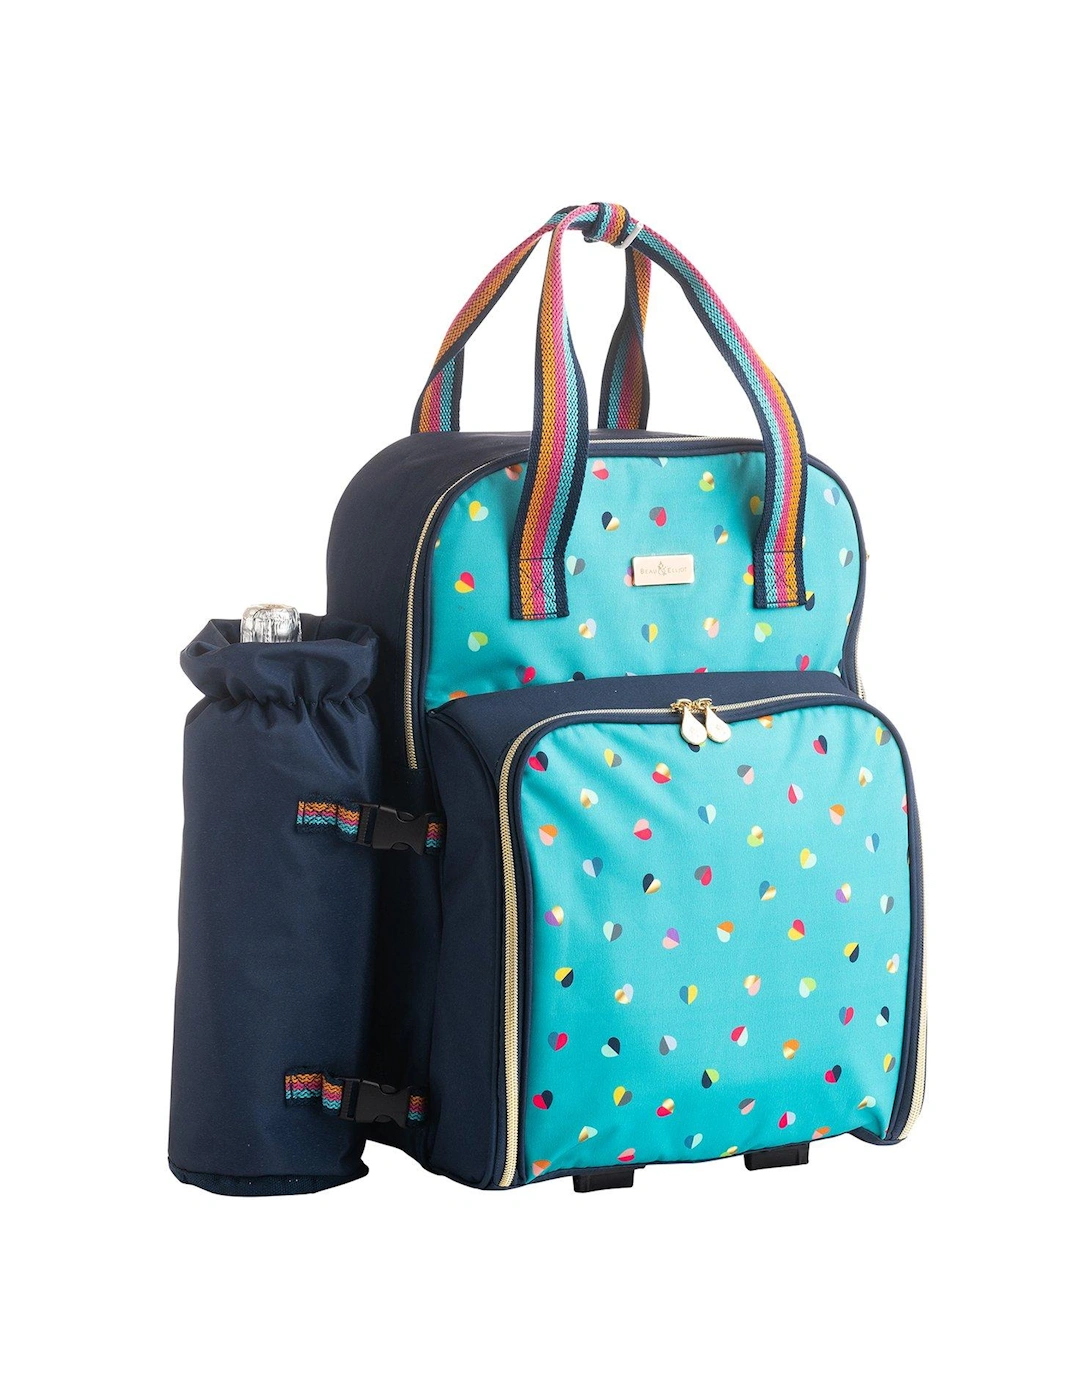 Confetti Mini - Insulated 2 Person Filled Picnic Backpack Set with Bottle Holder (16L), 2 of 1